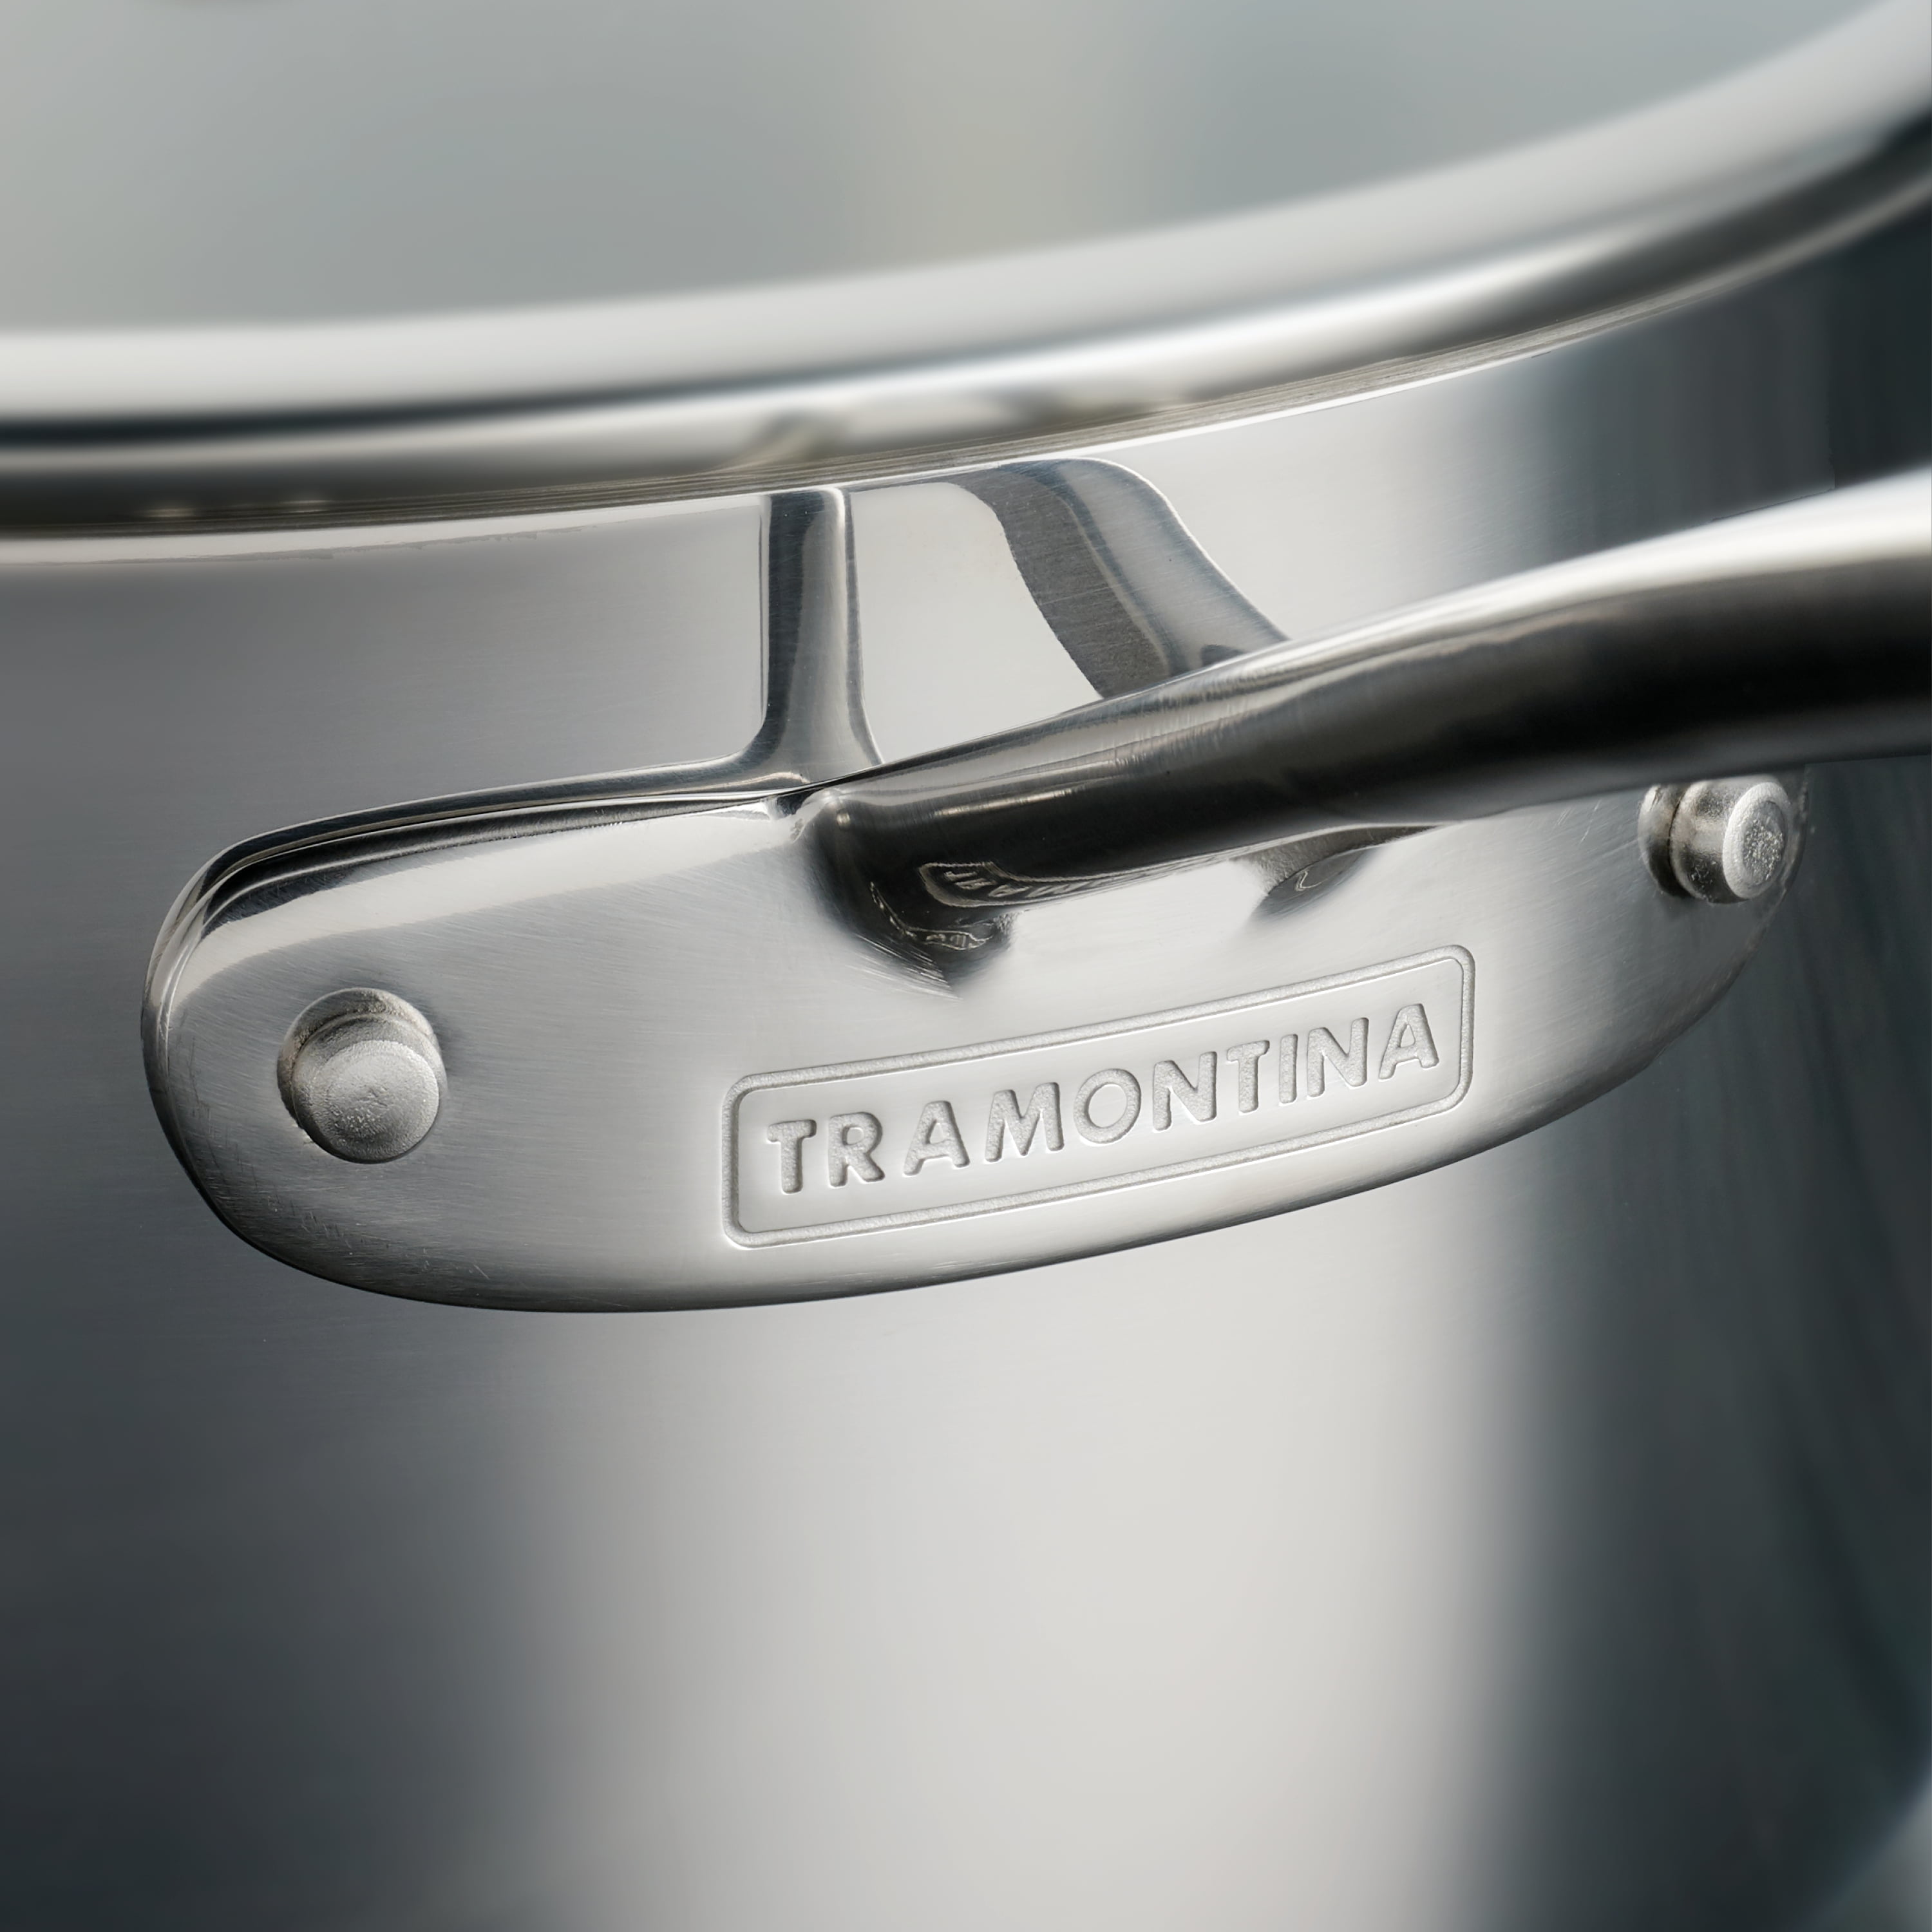 Tramontina Gourmet Tri-Ply Clad 1.5 qt Covered Sauce Pan, Stainless Steel